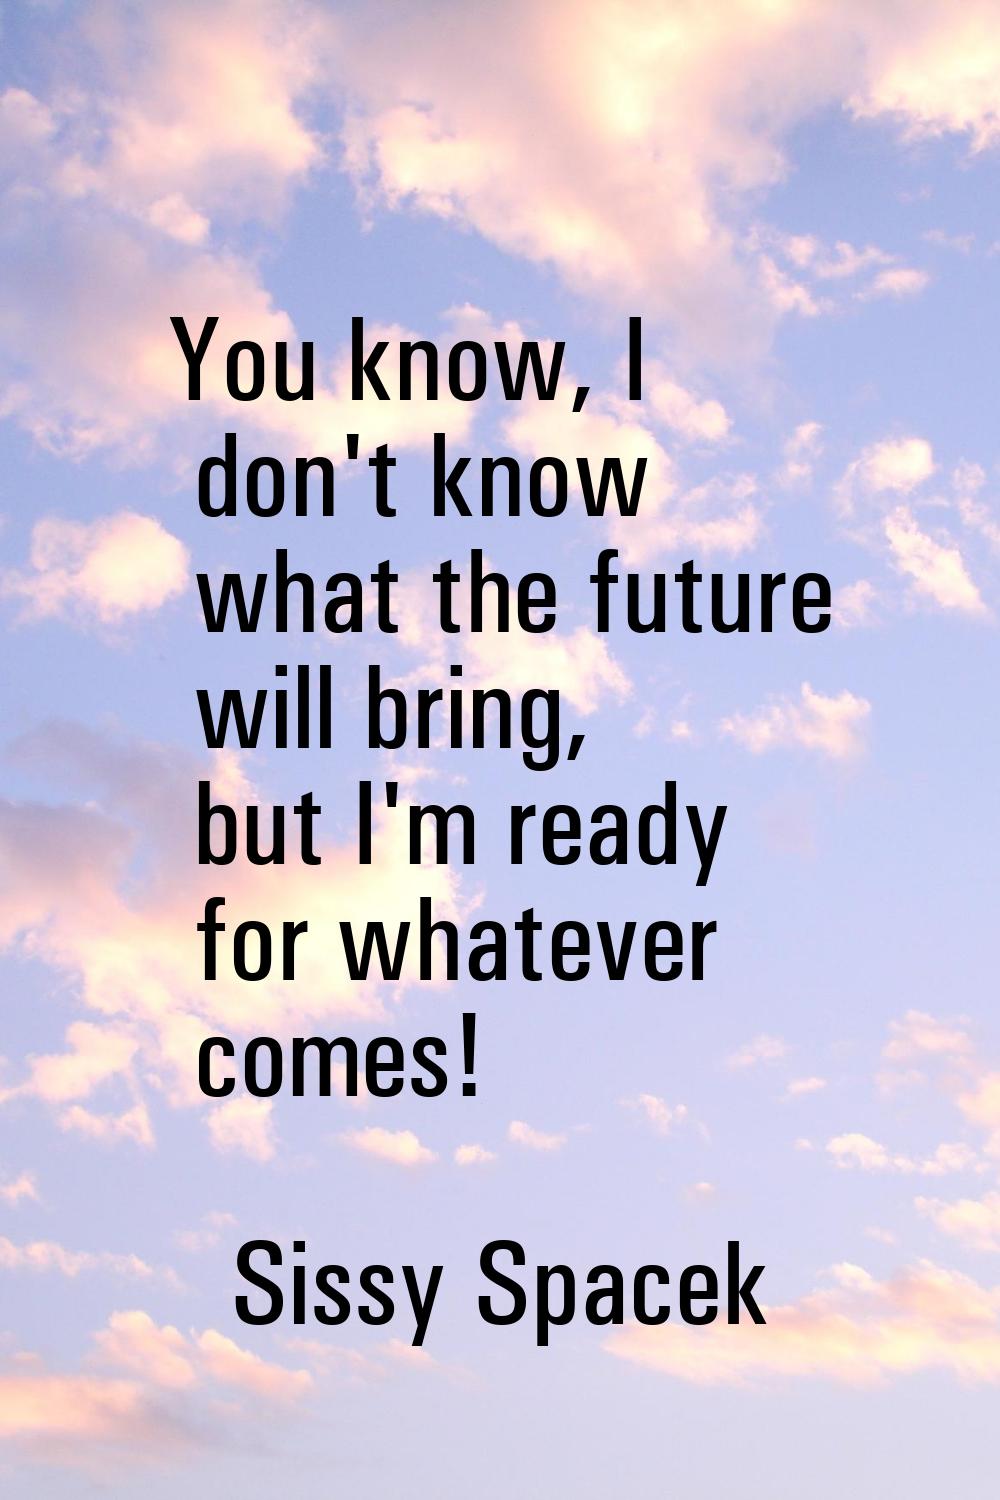 You know, I don't know what the future will bring, but I'm ready for whatever comes!